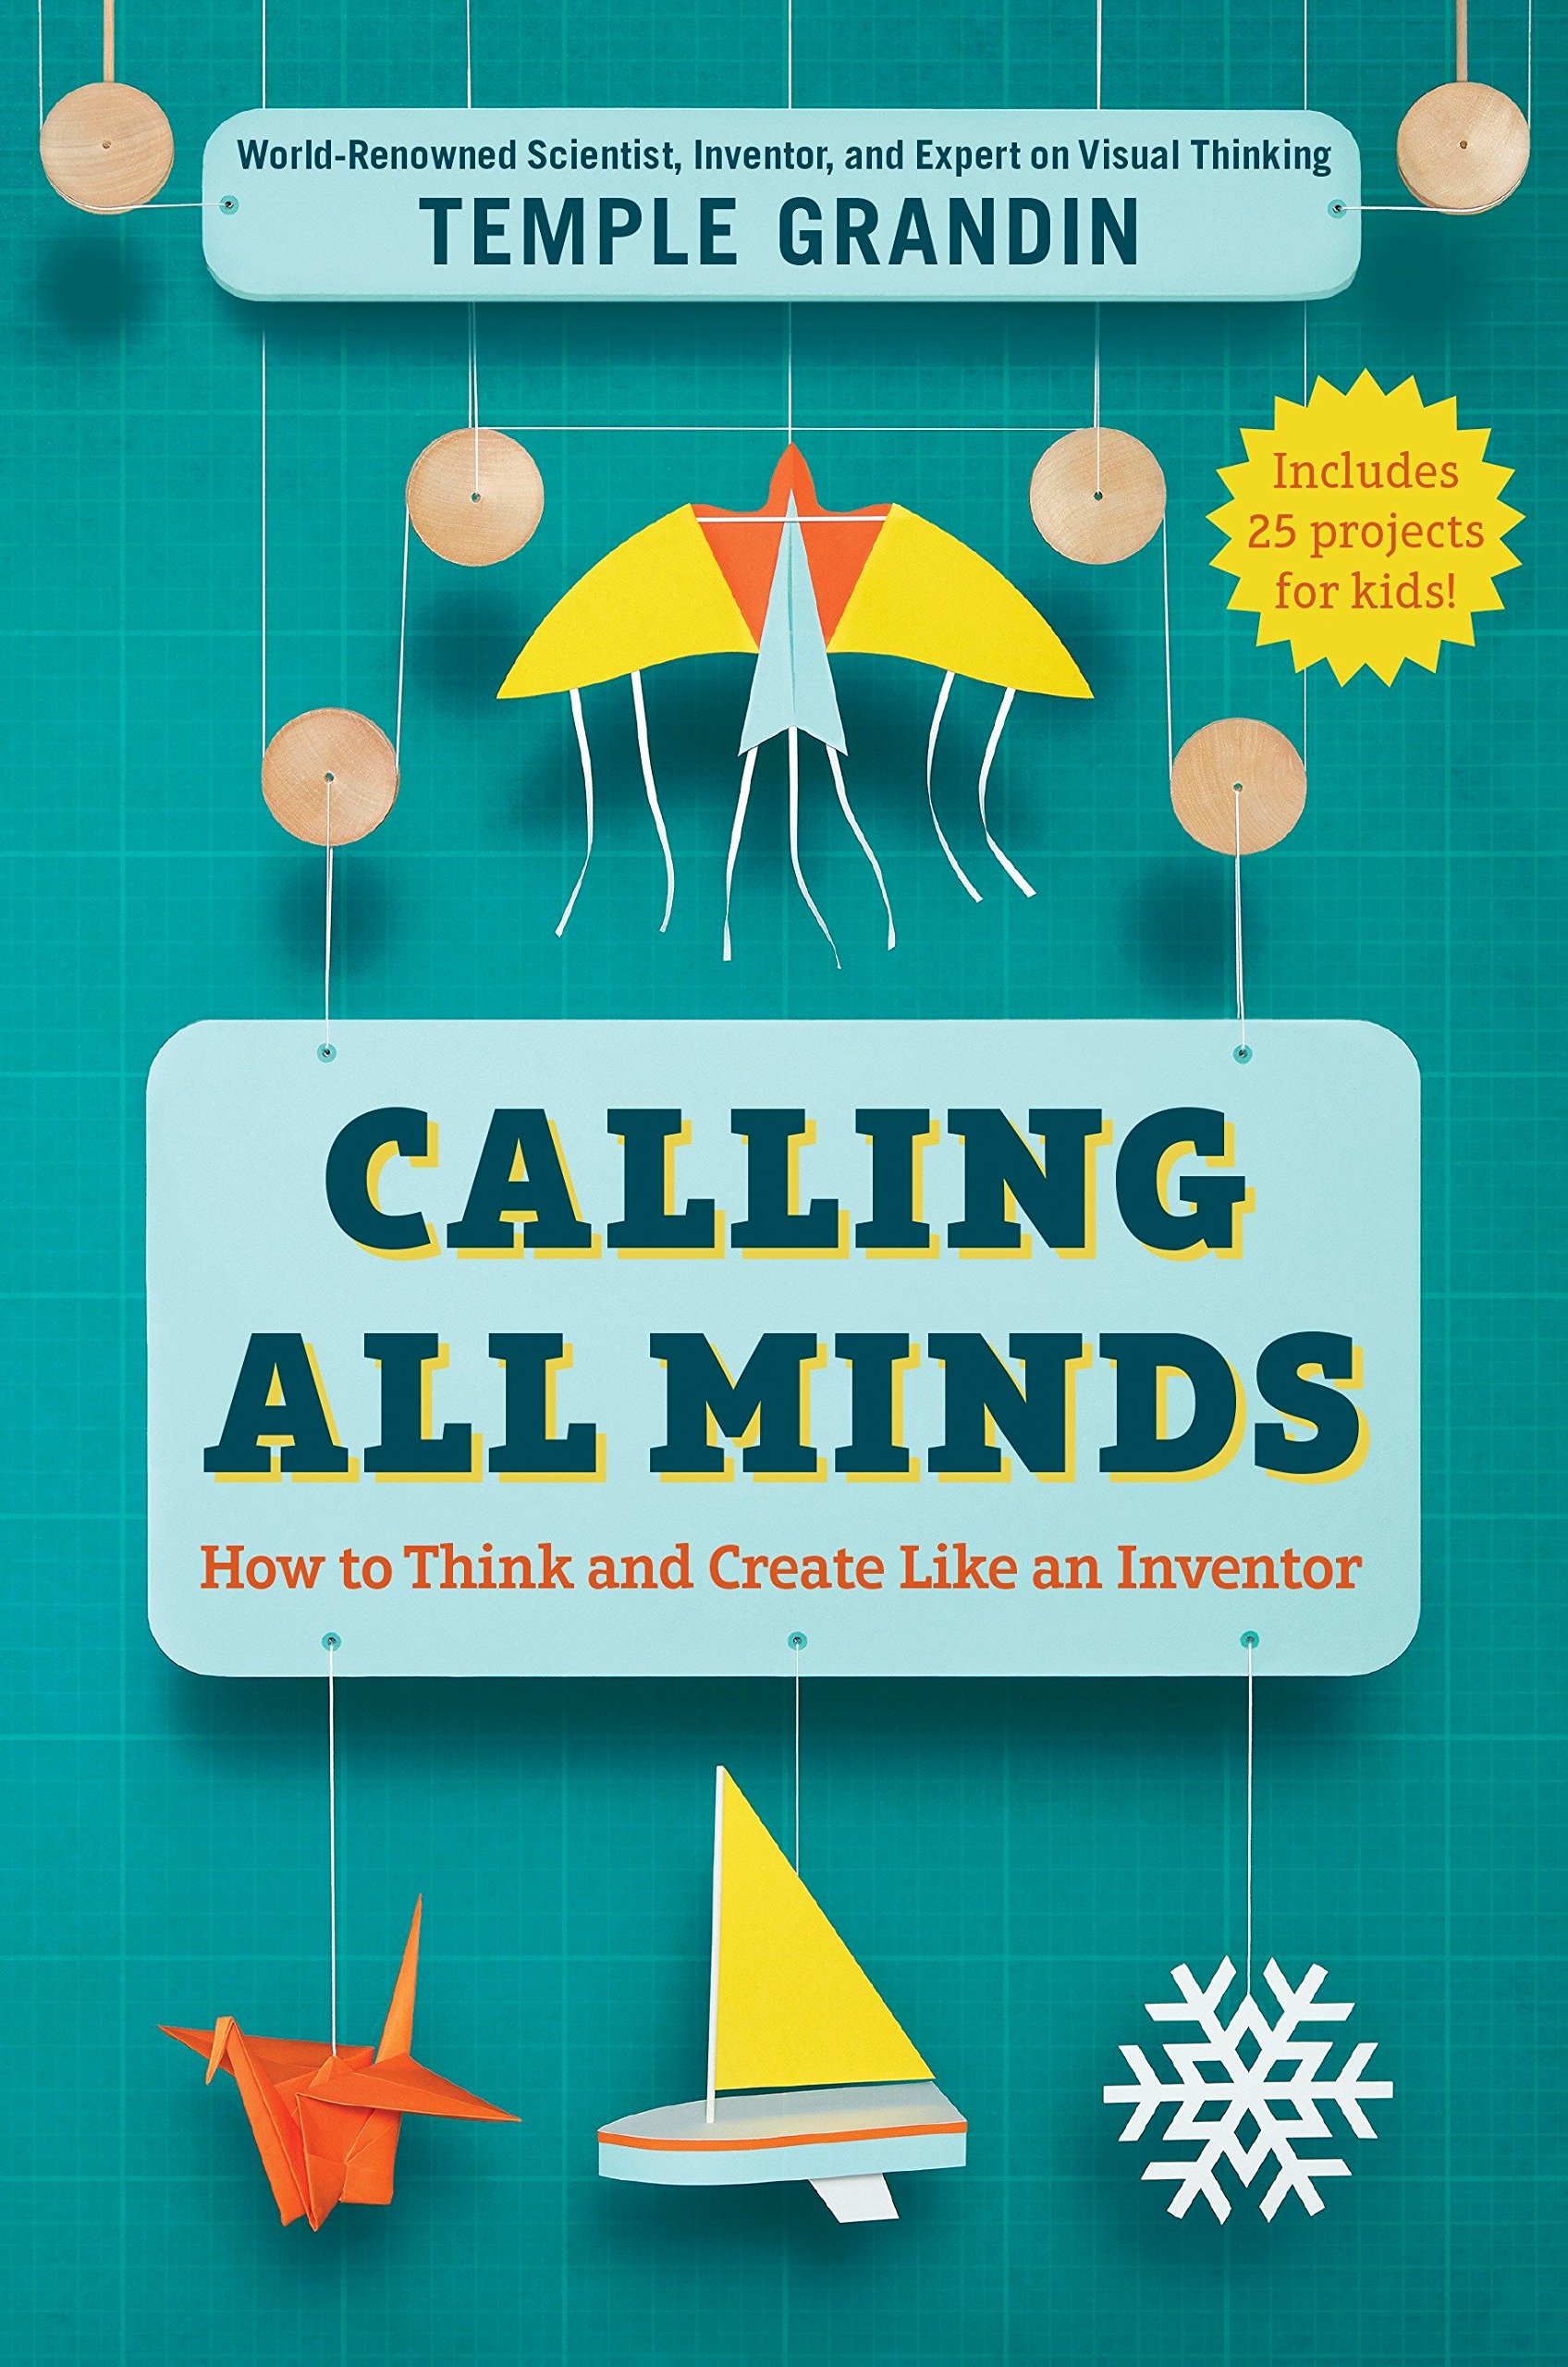 Cover image of Temple Grandin's 'Calling All Minds'